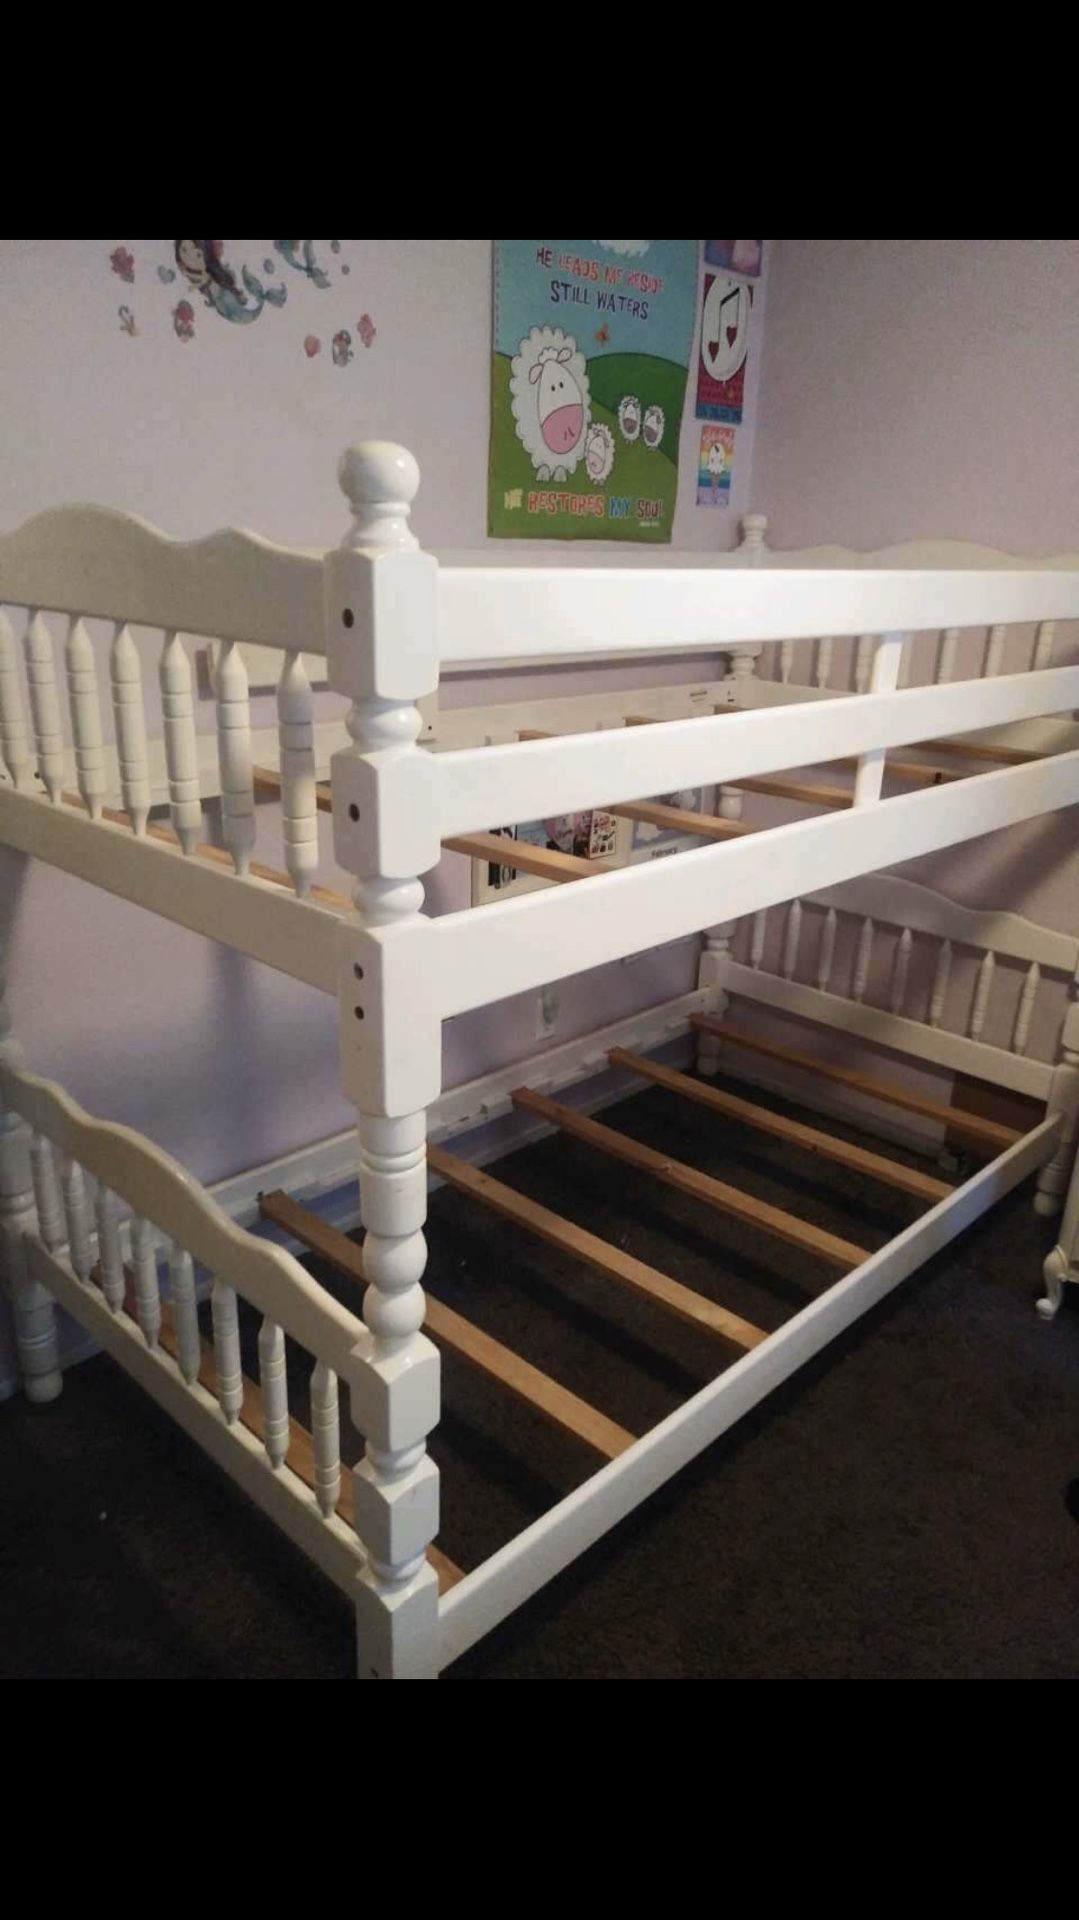 Bunk bed shabby chic sturdy, can be used as side by side takes twin mattresses (not included) great condition! Only $120